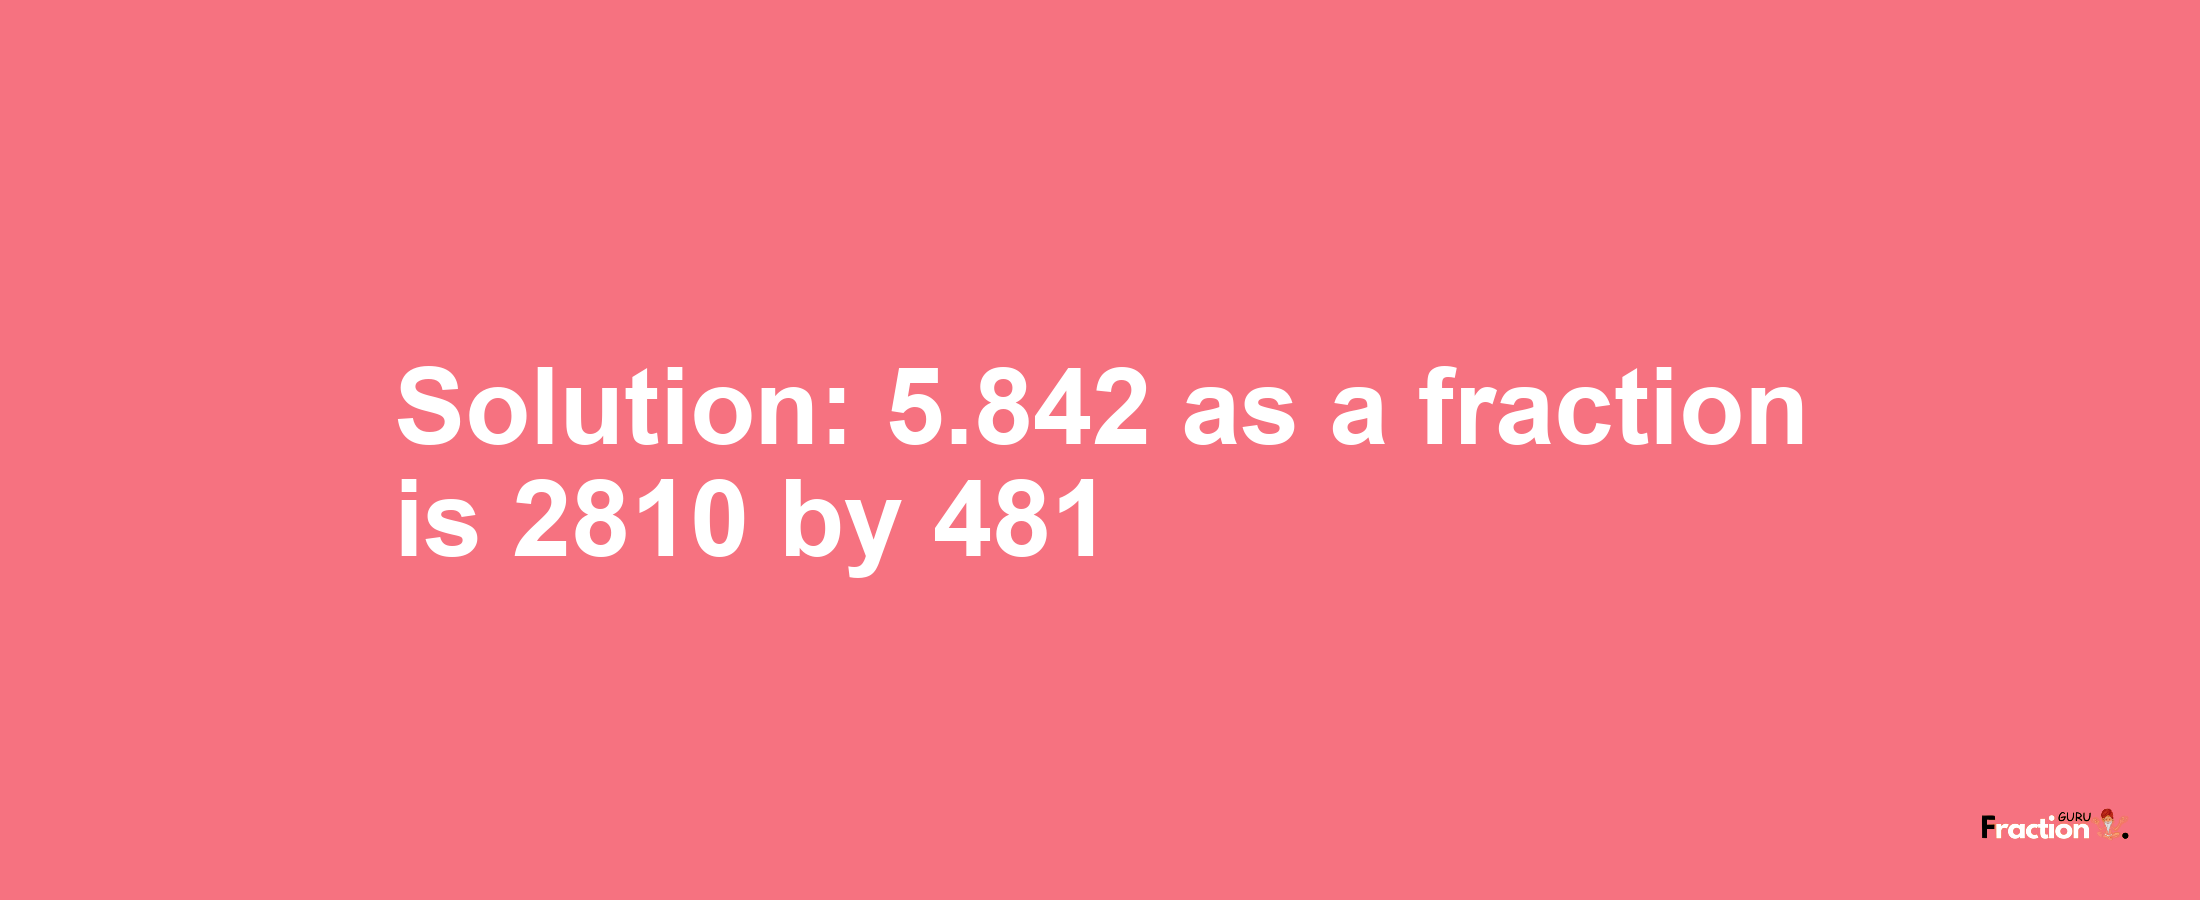 Solution:5.842 as a fraction is 2810/481